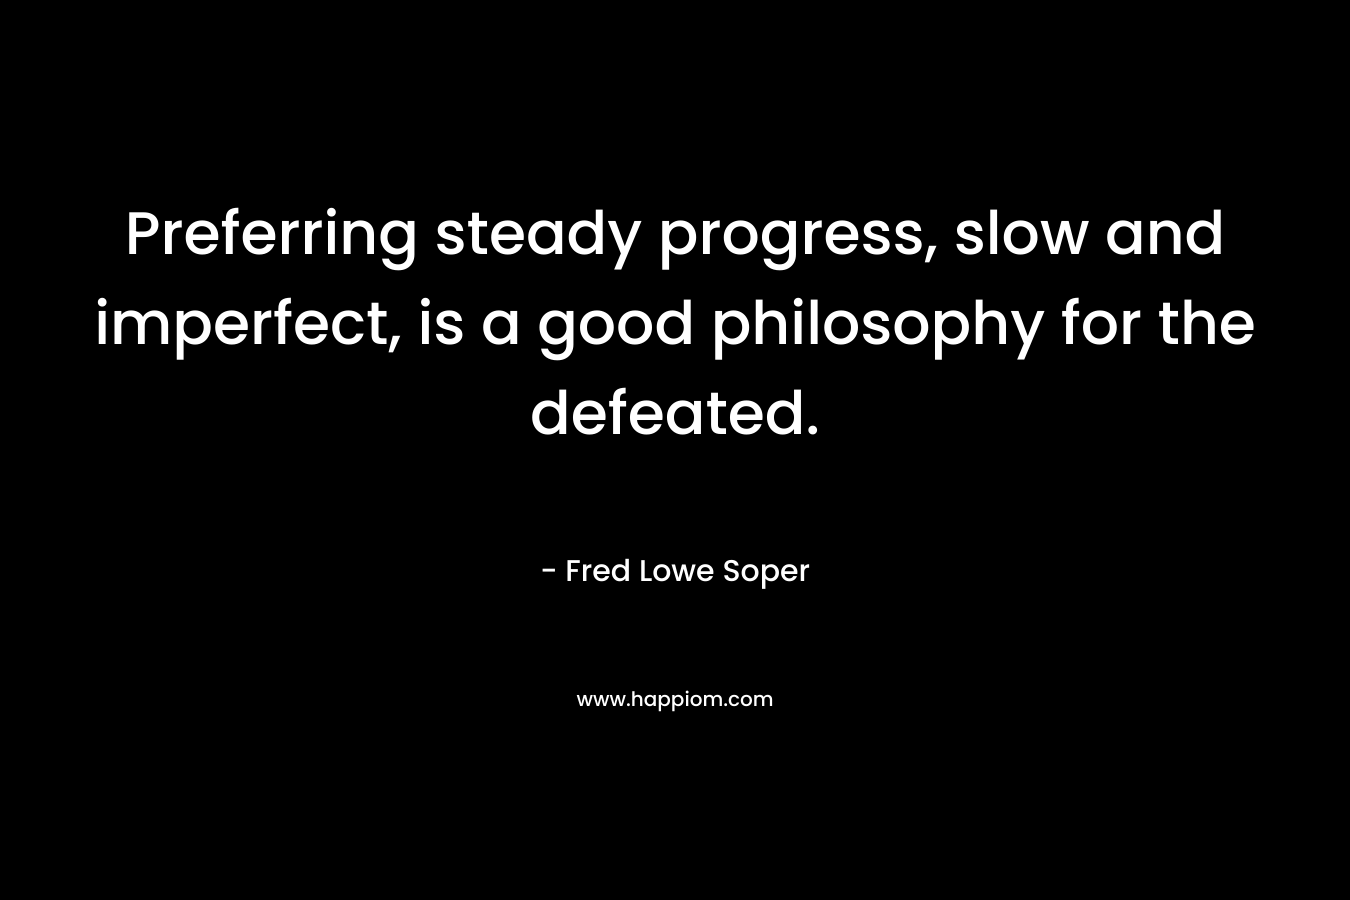 Preferring steady progress, slow and imperfect, is a good philosophy for the defeated. – Fred Lowe Soper